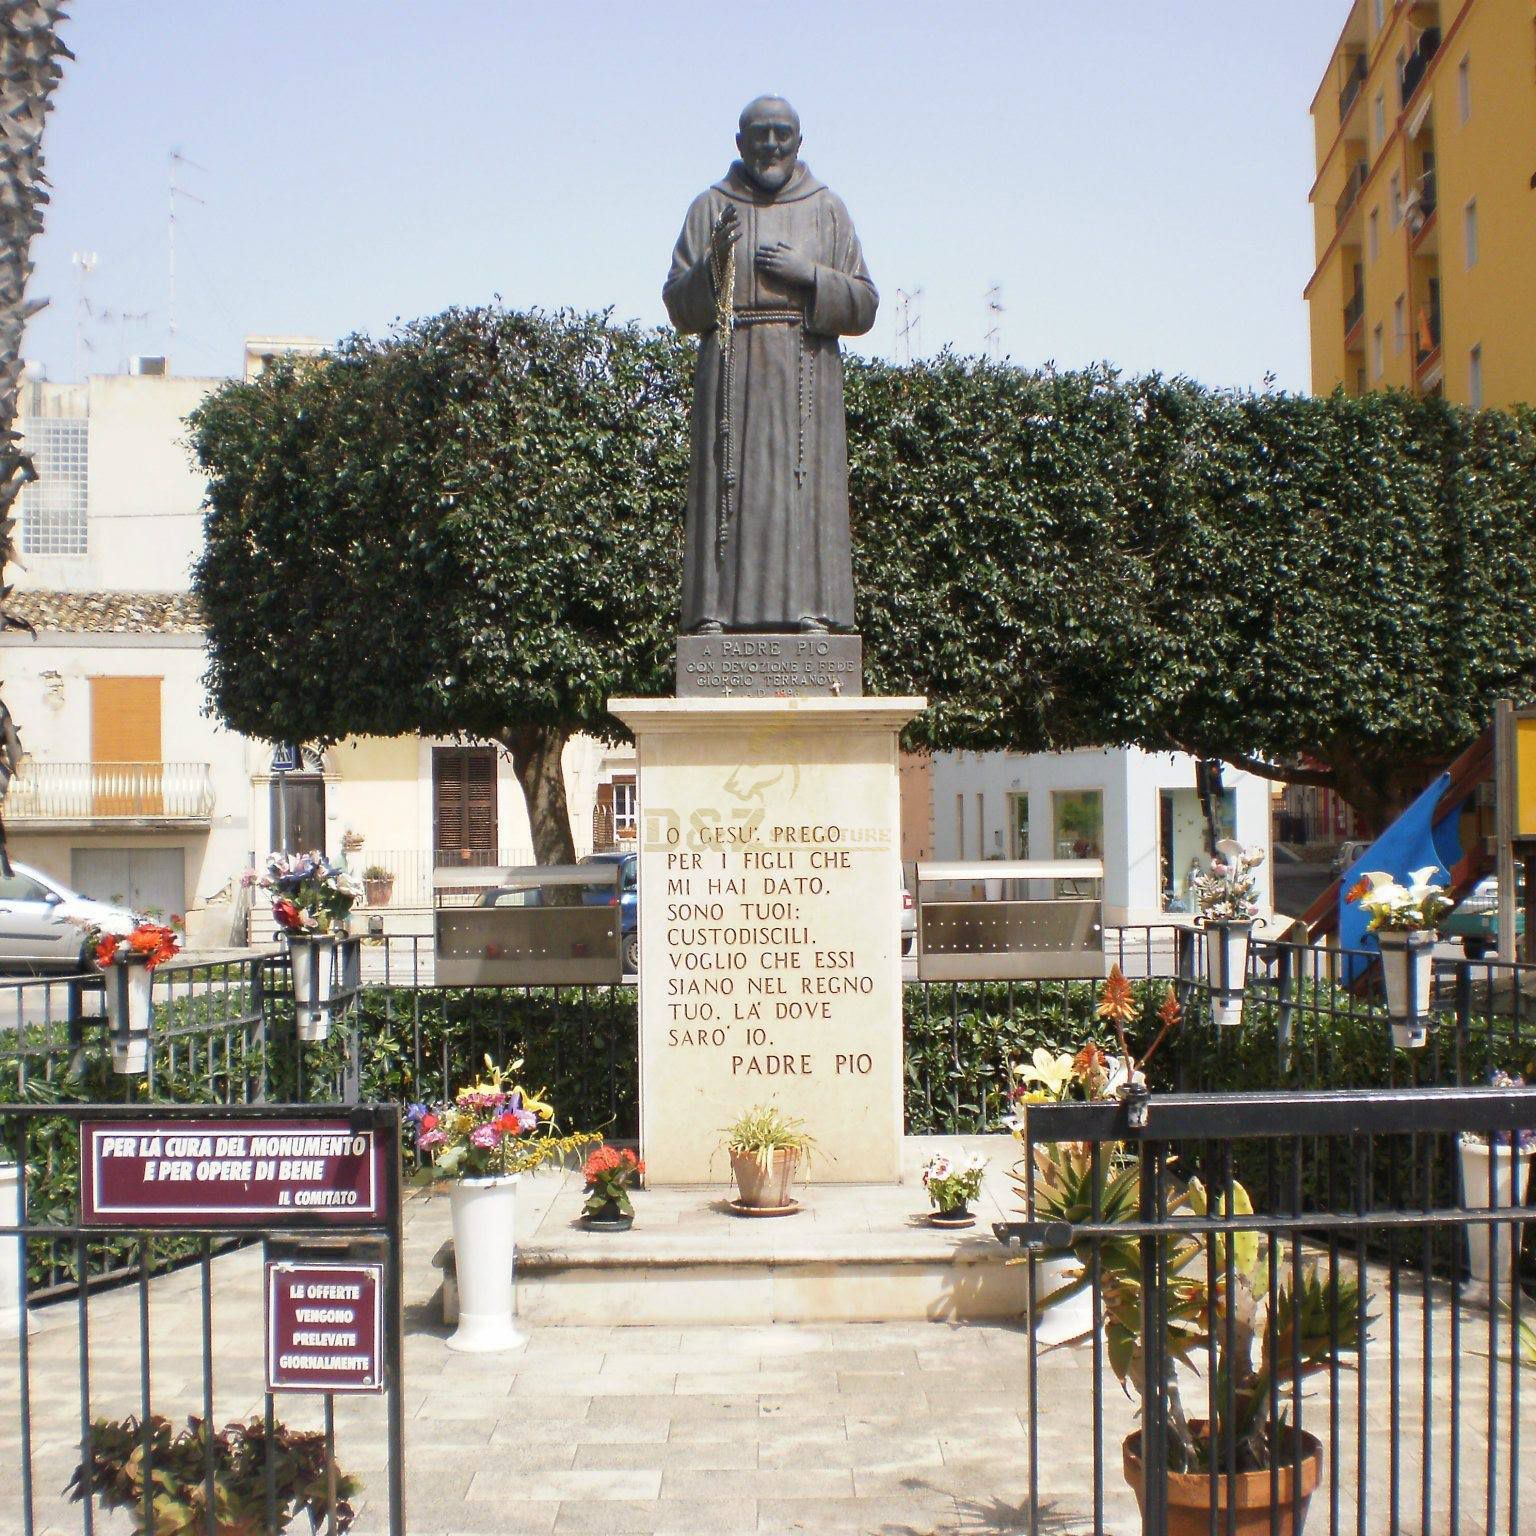 Large bronze statue of Saint Padre Pio used for religious decoration